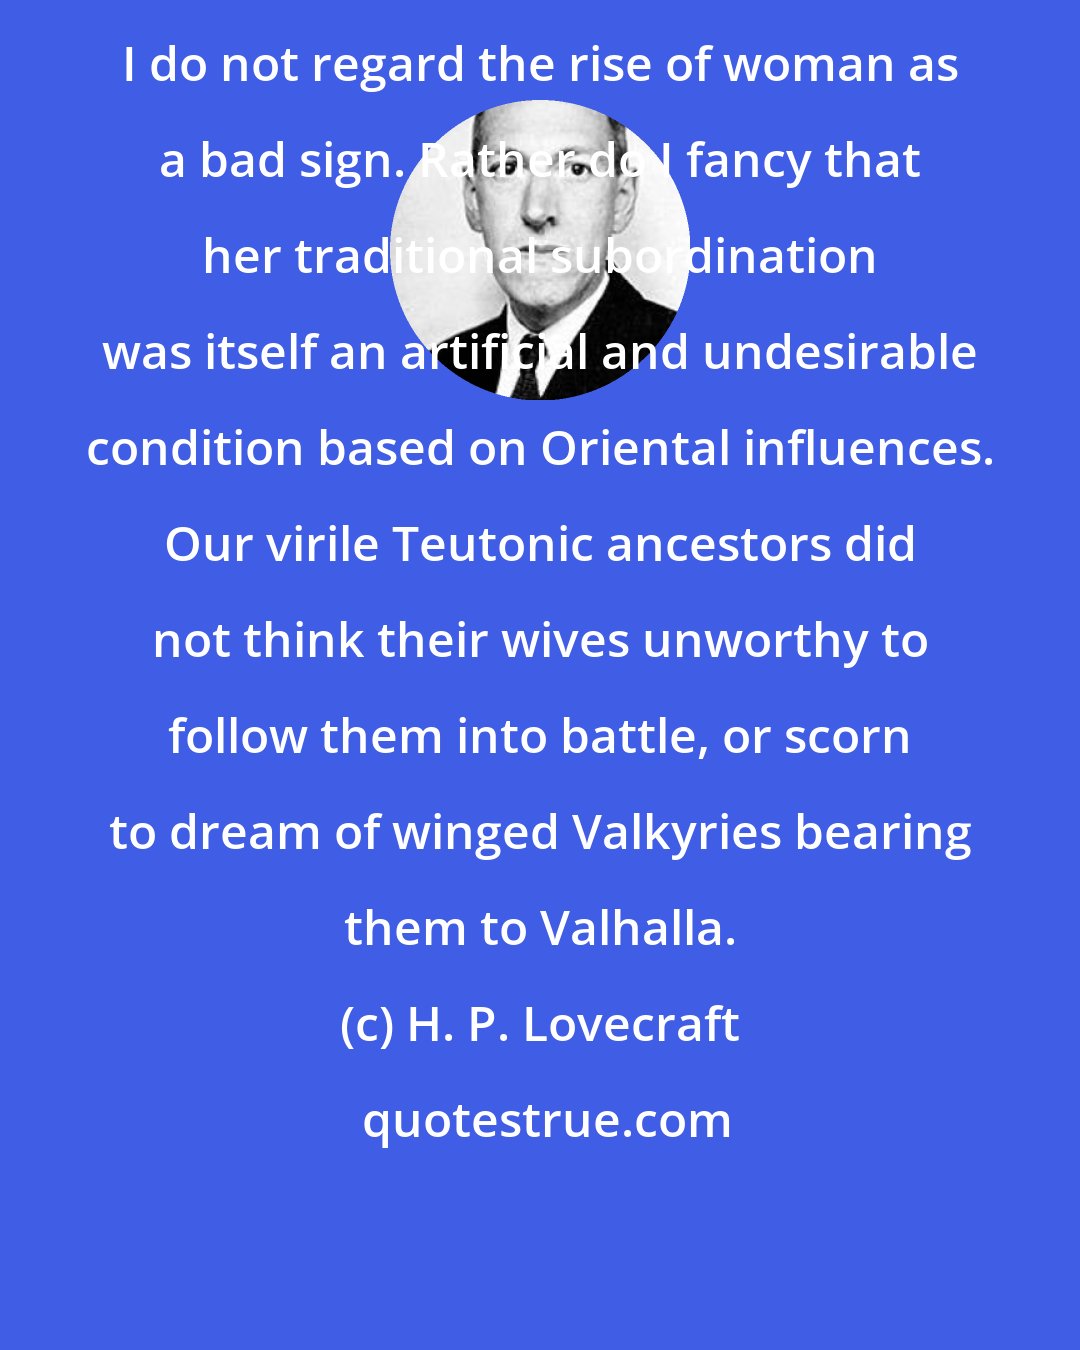 H. P. Lovecraft: I do not regard the rise of woman as a bad sign. Rather do I fancy that her traditional subordination was itself an artificial and undesirable condition based on Oriental influences. Our virile Teutonic ancestors did not think their wives unworthy to follow them into battle, or scorn to dream of winged Valkyries bearing them to Valhalla.